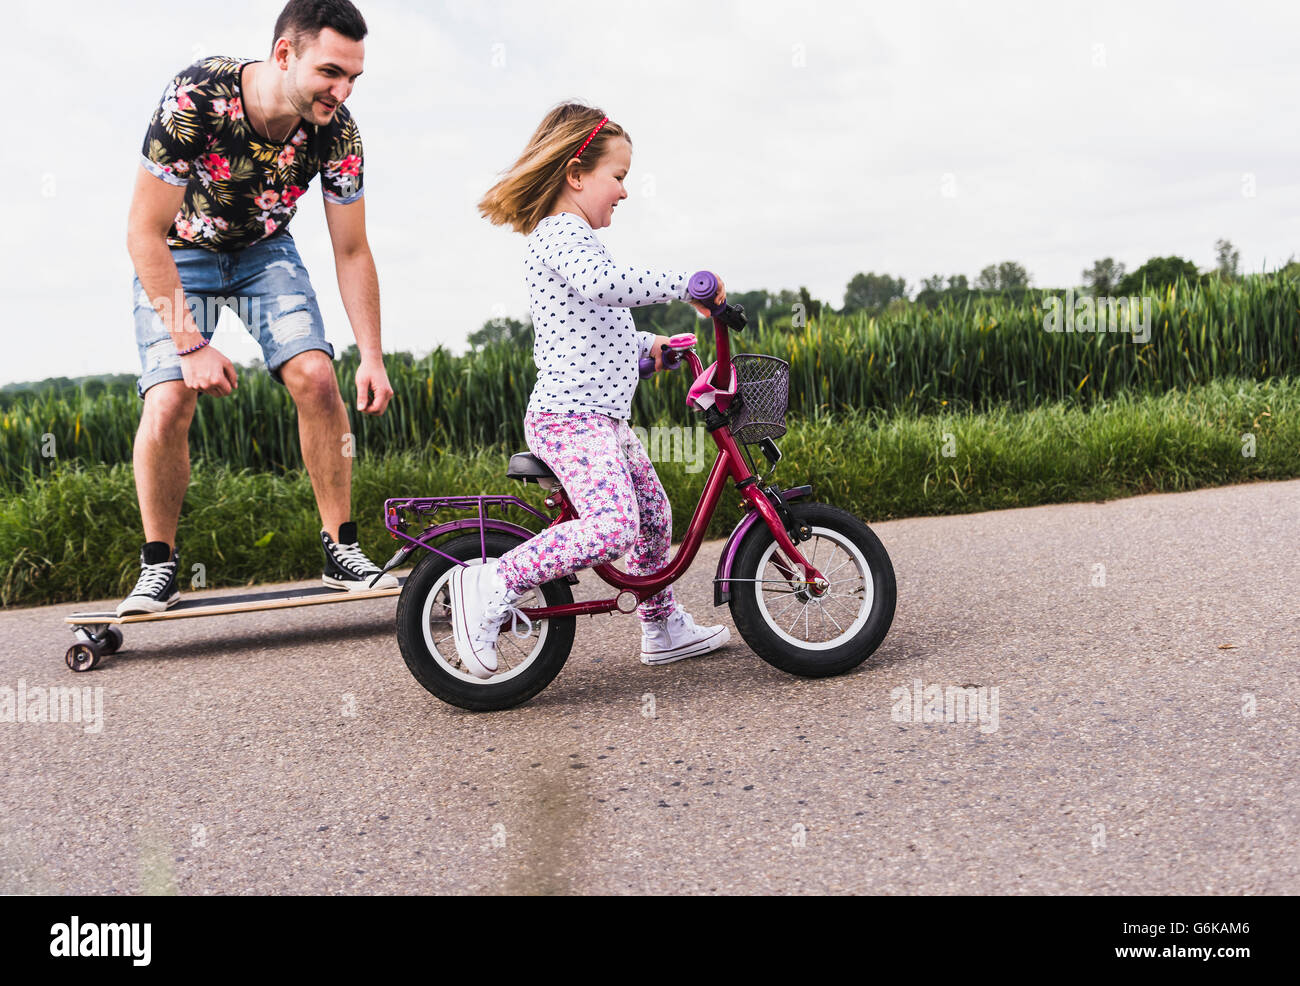 Father on skateboard accompanying daughter on bicycle Stock Photo